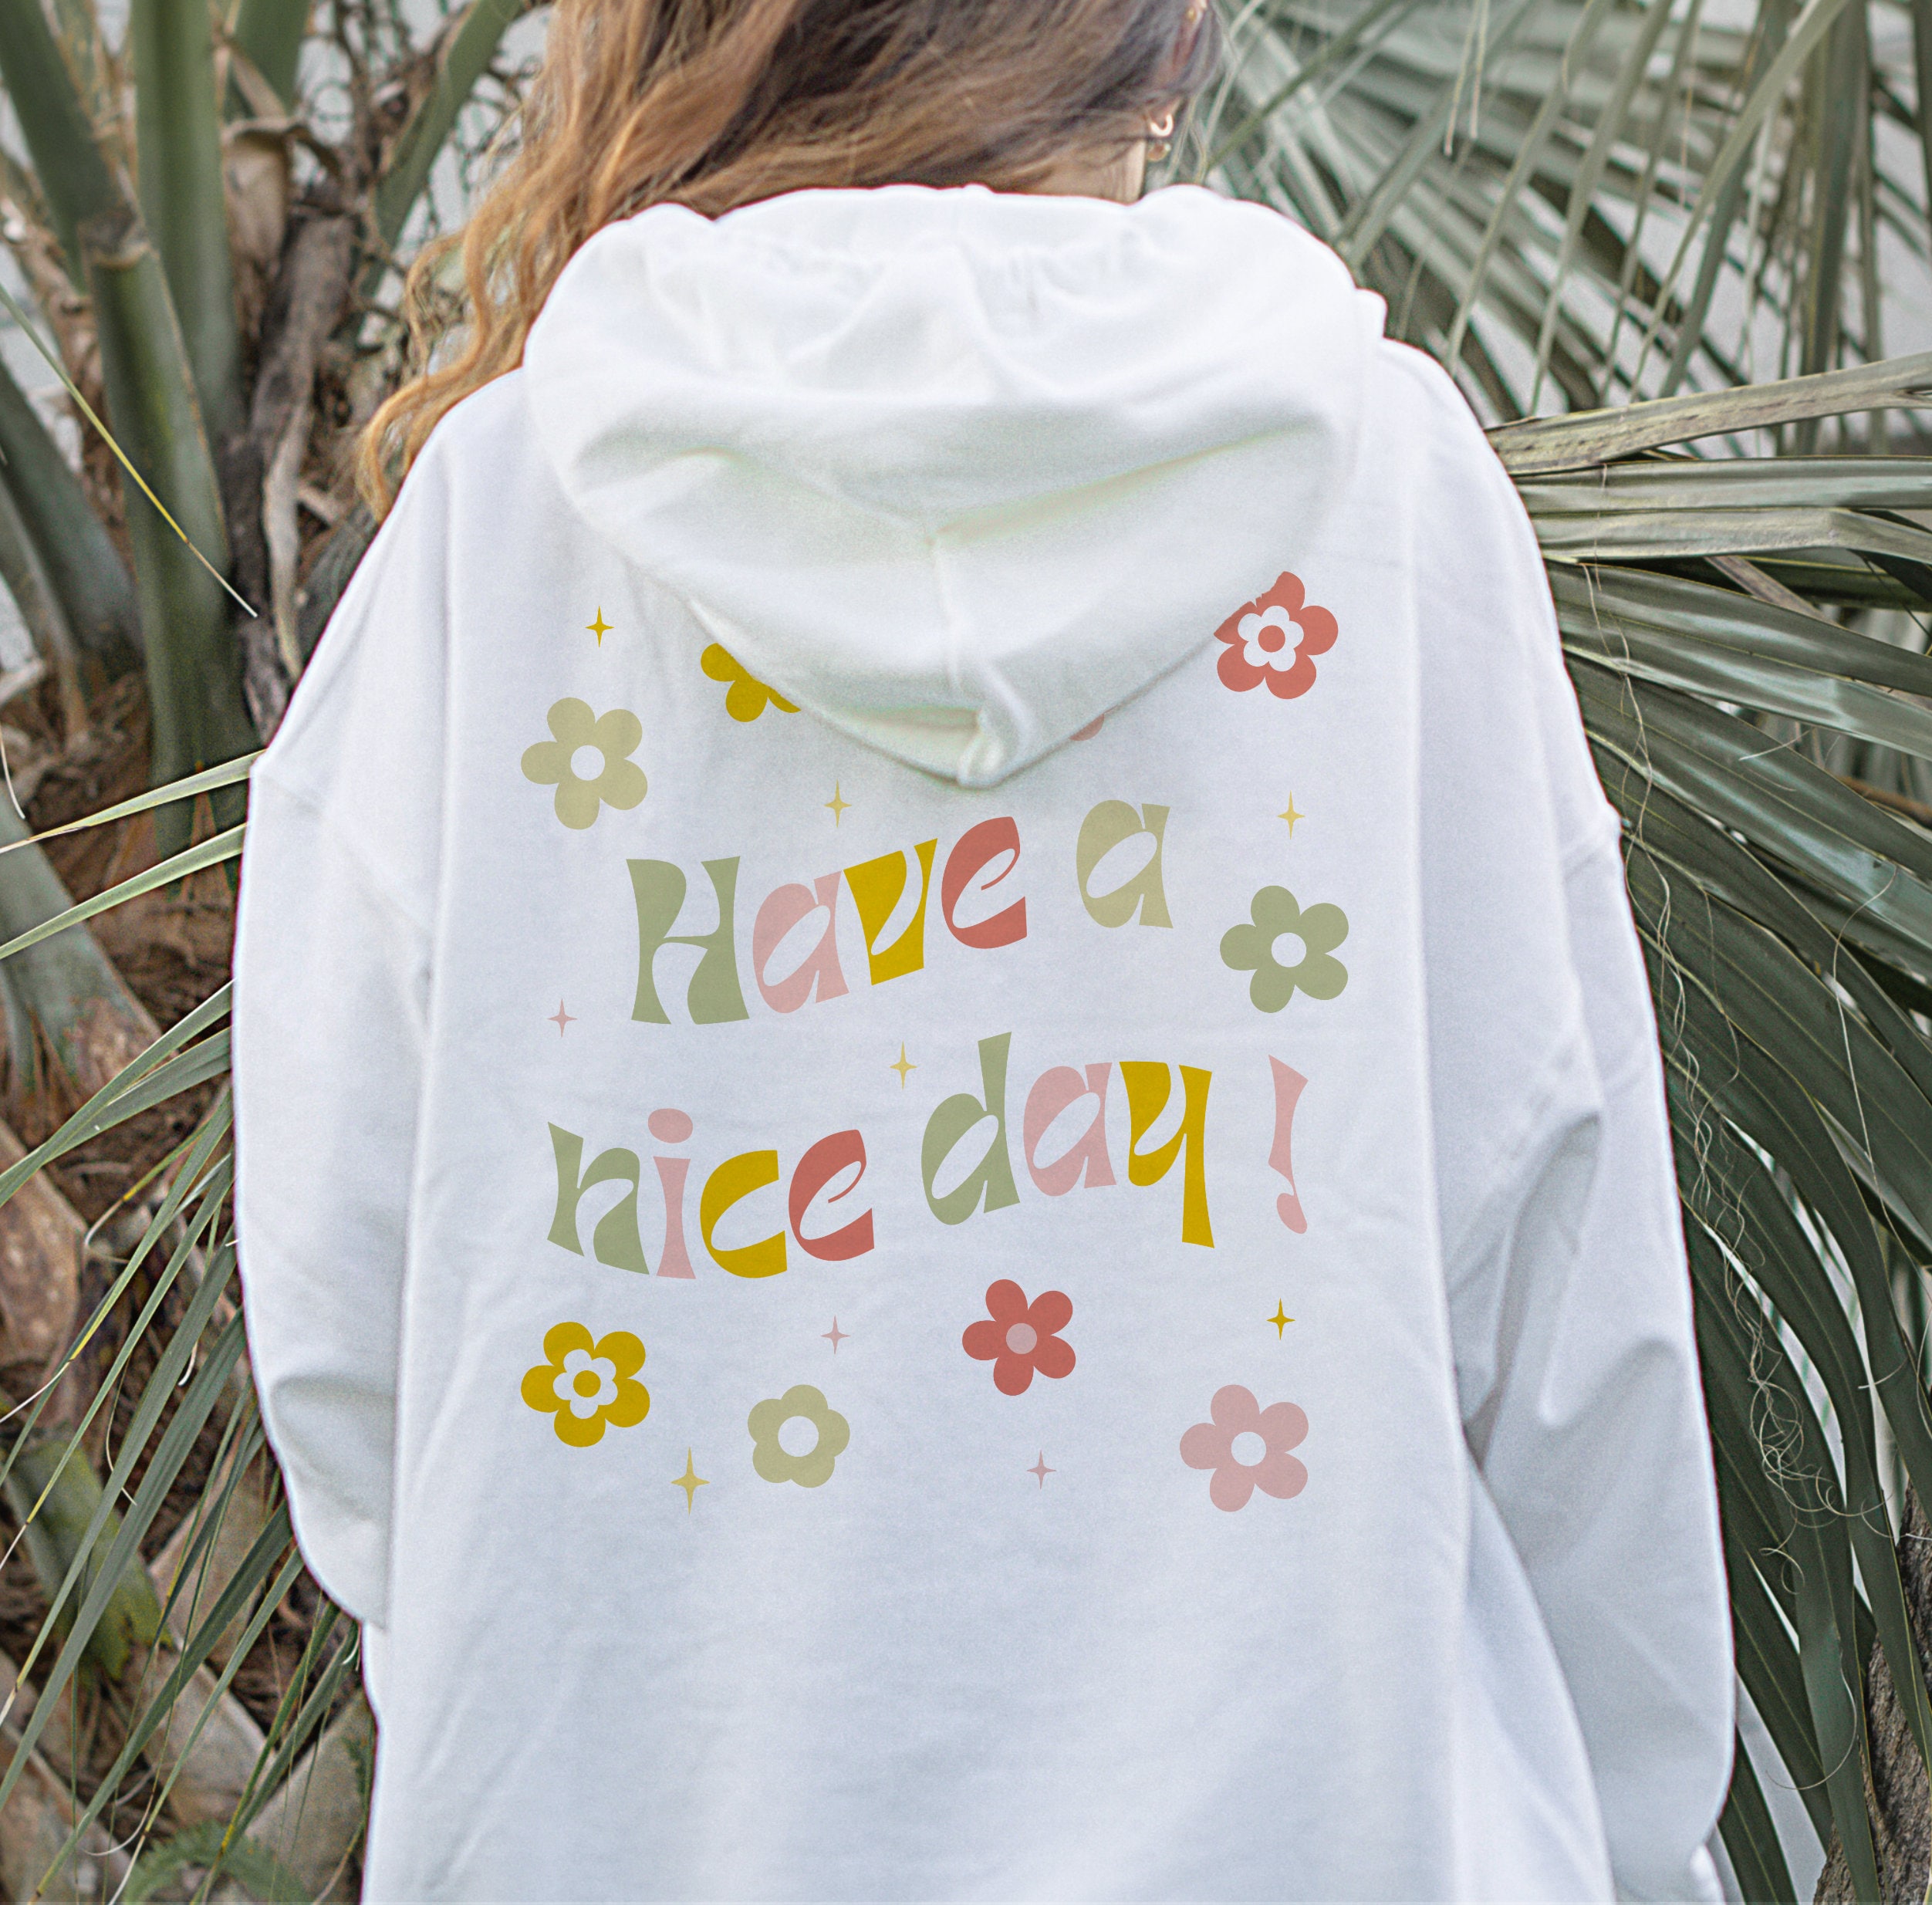 Have a nice day sweatshirt Hippie clothes VSCO hoodie 70s clothes positive hoodie brown sweatshirt funky clothes 60s retro clothes